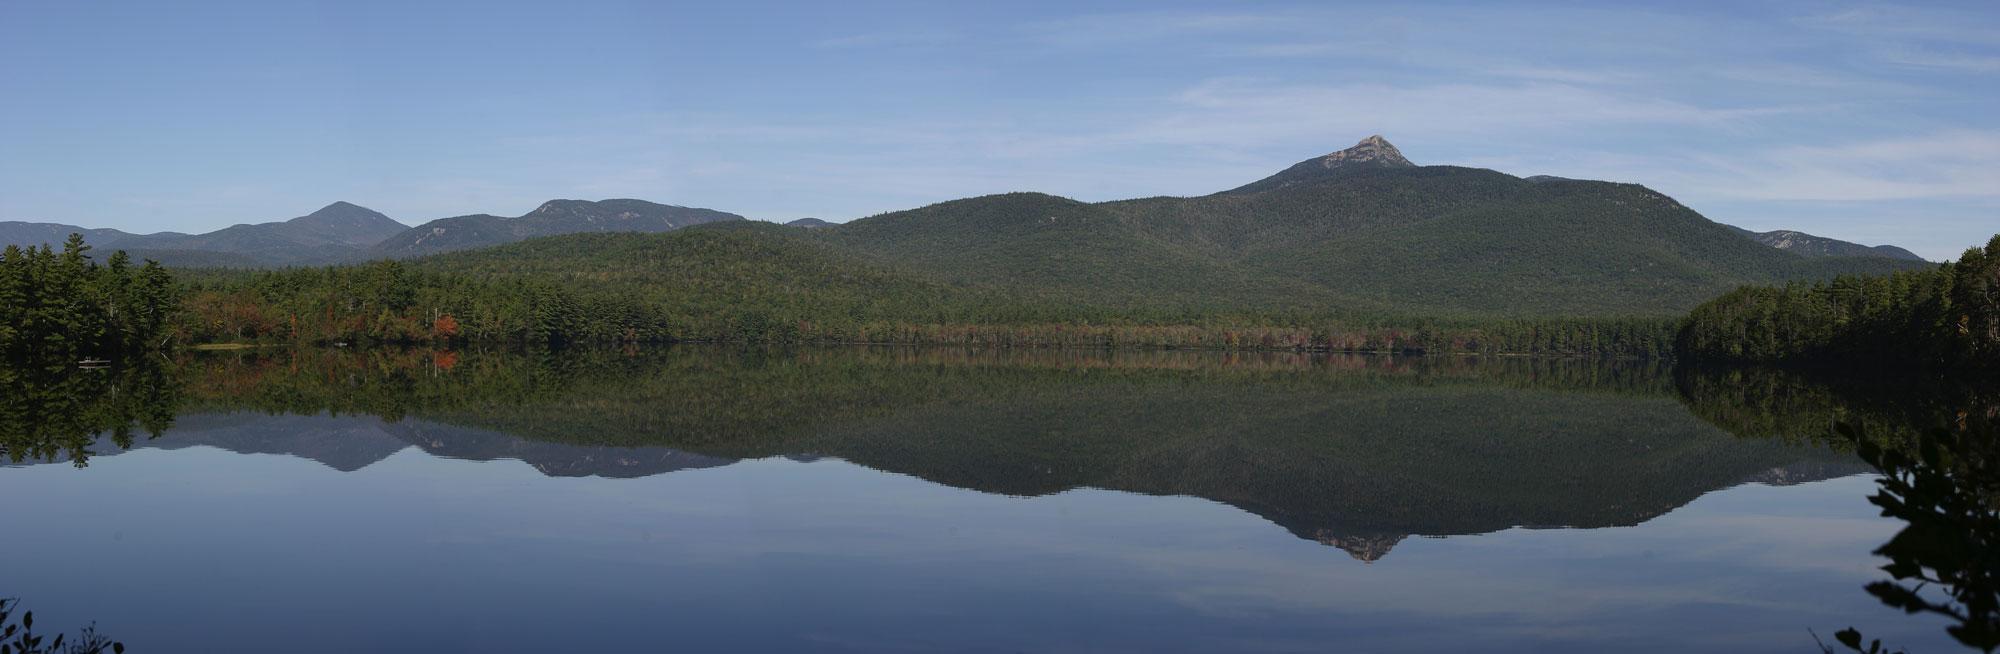 Mount Chocorua Reflection (user submitted)